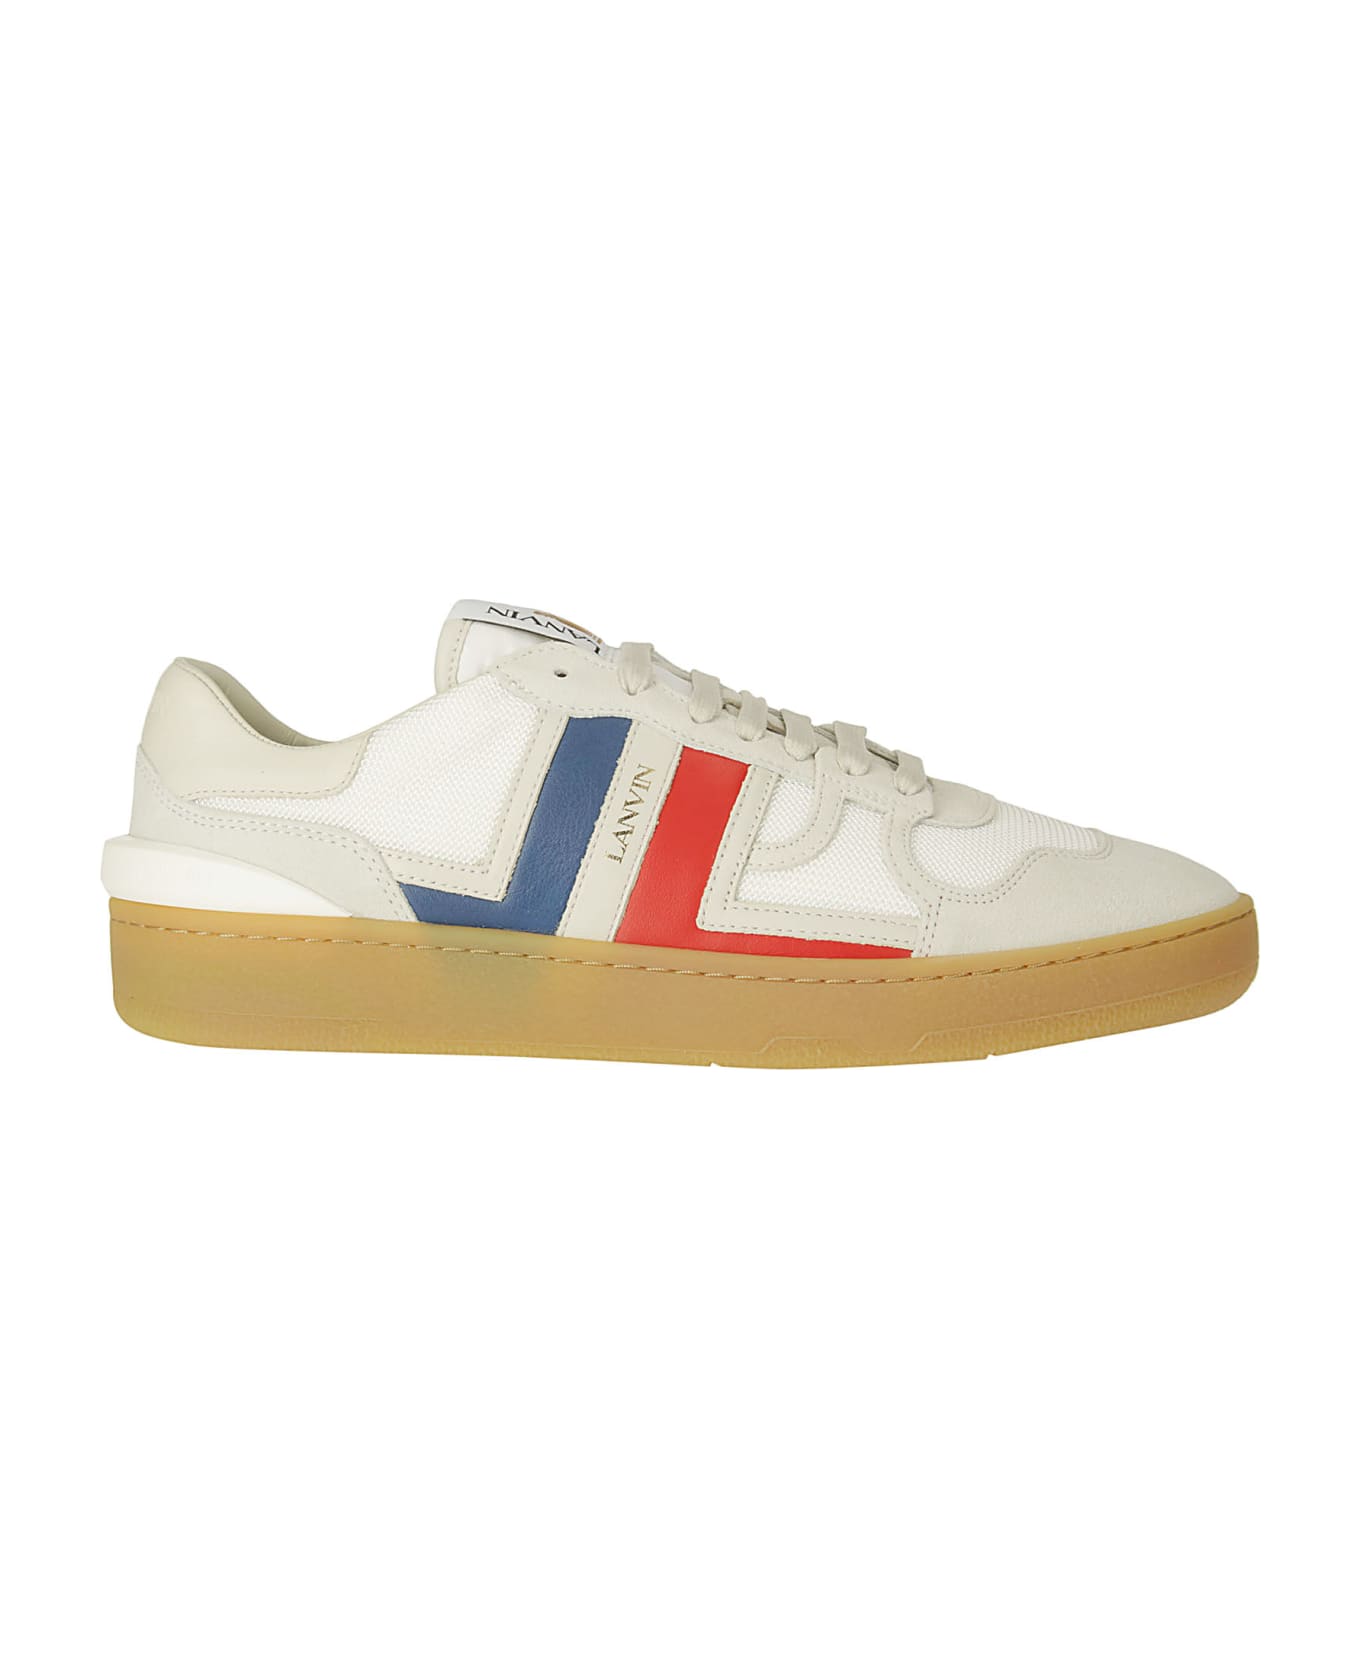 Lanvin Clay Low Top Sneakers - WHITE/MULTICOLOUR スニーカー